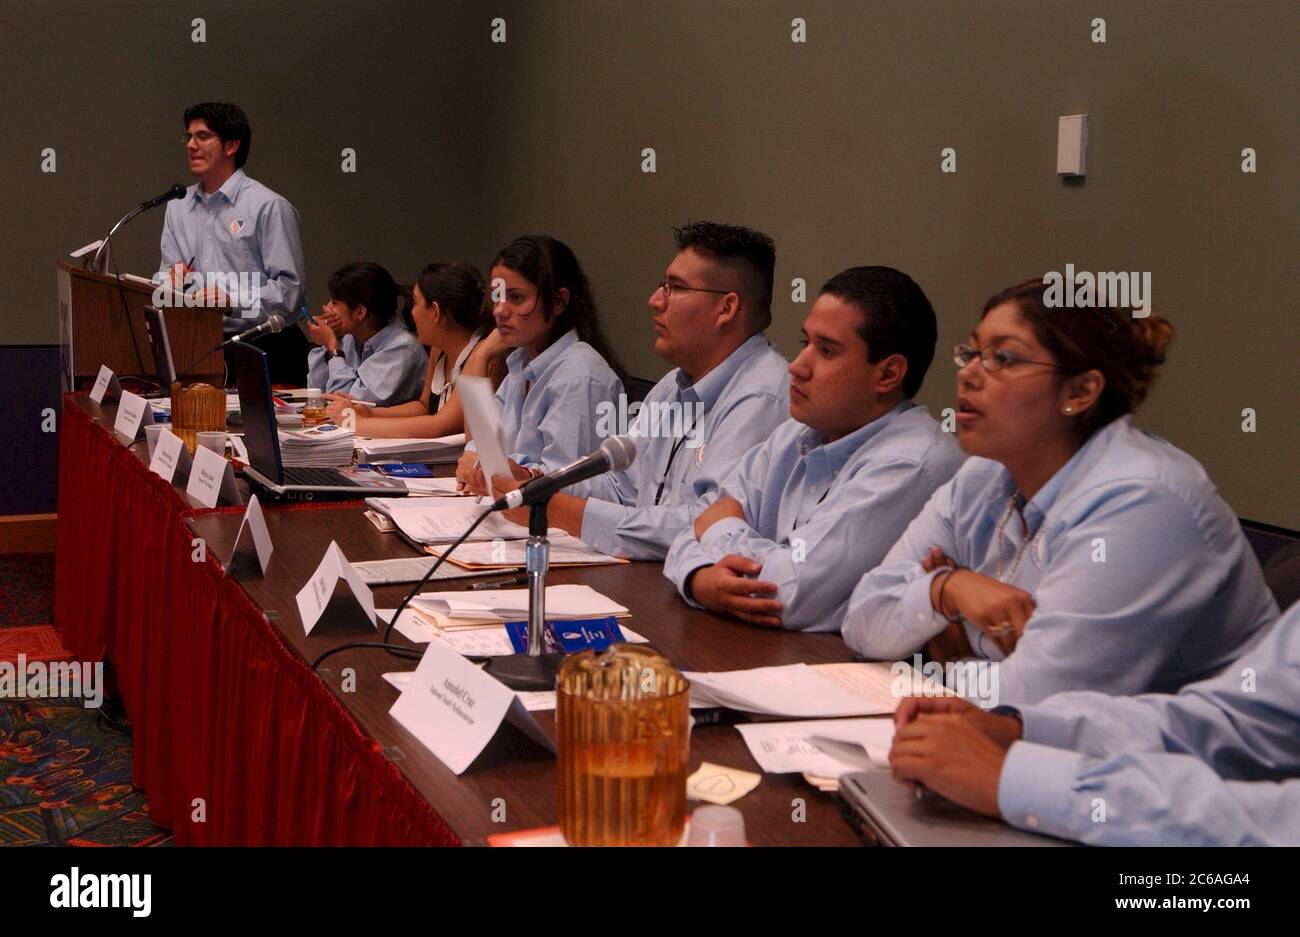 San Antonio, Texas USA, July 2004: At the League of United Latin American Citizens (LULAC) National Convention, members of LULAC's youth task force discuss issues of interest to teens at a session for younger members. ©Bob Daemmrich Stock Photo